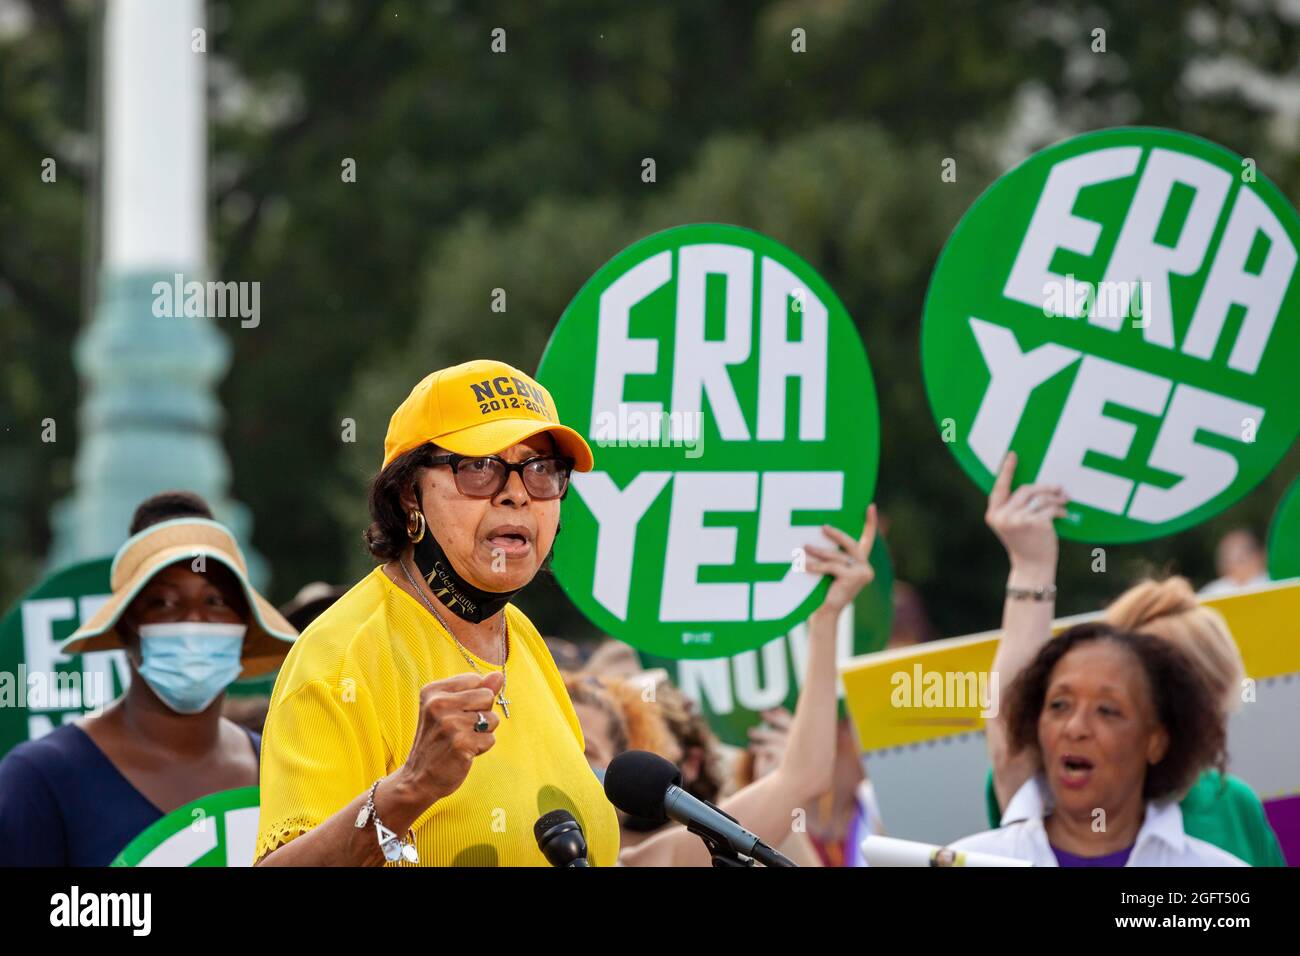 Washington, DC, USA, 26 August, 2021.  Pictured: Dr. E. Faye Williams speaks at a rally to pass the Equal Rights Amendment (ERA) at the Supreme Court.  The amendment would prohibit discrimination on the basis of sex, which would require equal pay for women, among many other changes.  The required 38 states have ratified the amendment, but, unlike other constitutional amendments, a time limit was placed on the ERA, which has now expired.  ERA proponents are pressuring Congress to extend the time limit.  Credit: Allison Bailey / Alamy Live News Stock Photo